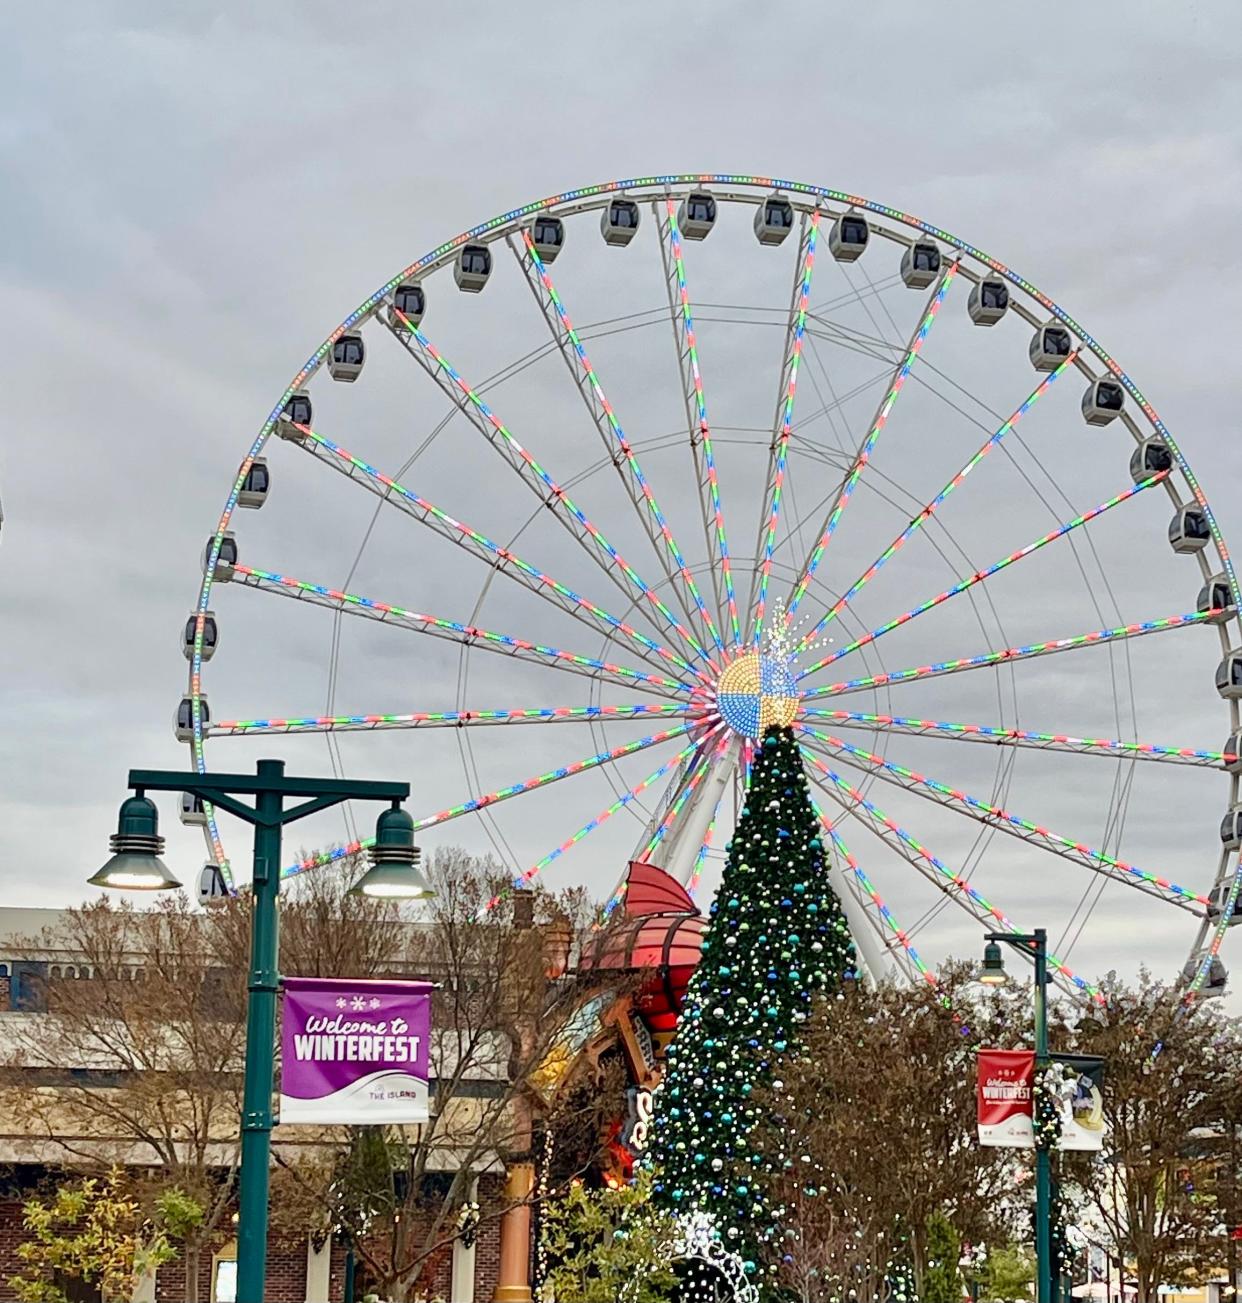 Pigeon Forge Family fun in a Tennessee winter wonderland